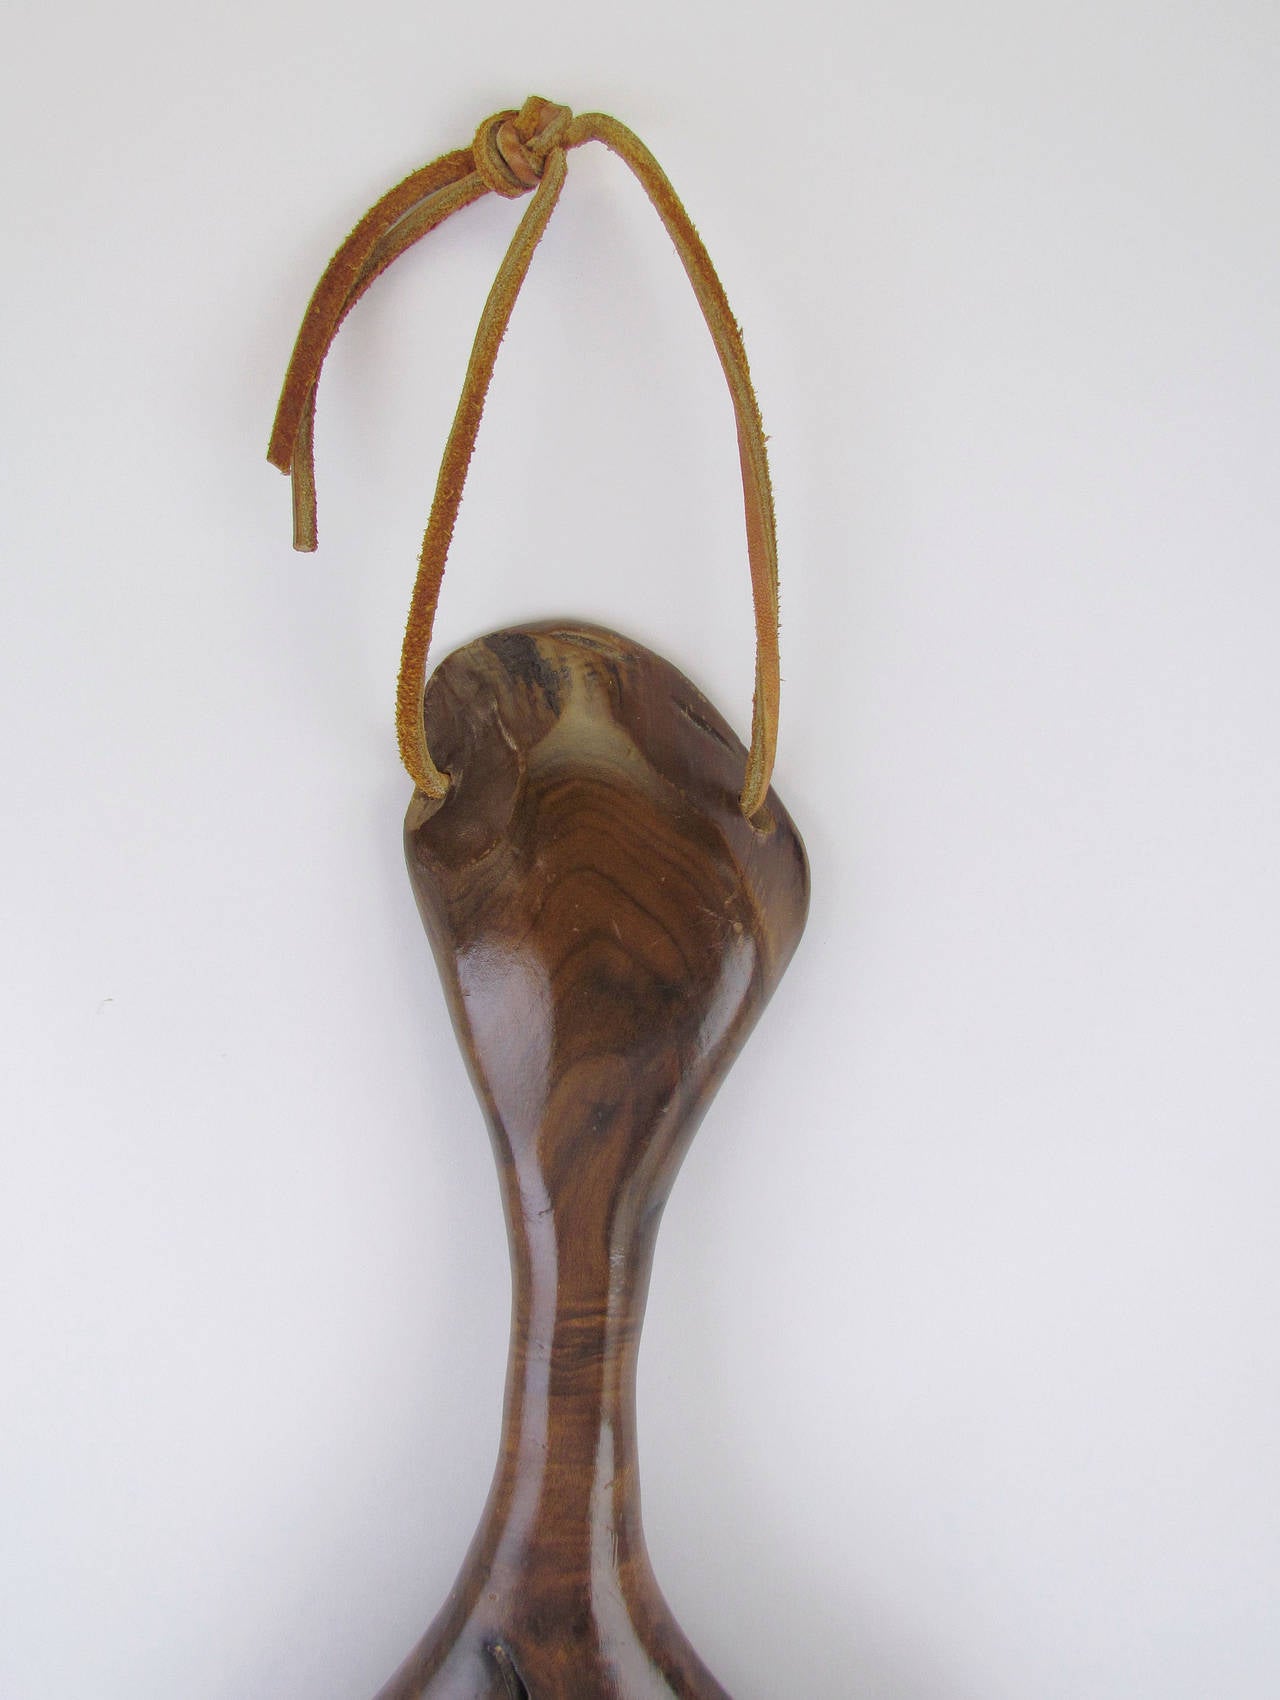 Late 20th Century Studio Made Hand-Carved Burl Wood Wall Hanging Hand Mirror, circa 1970s